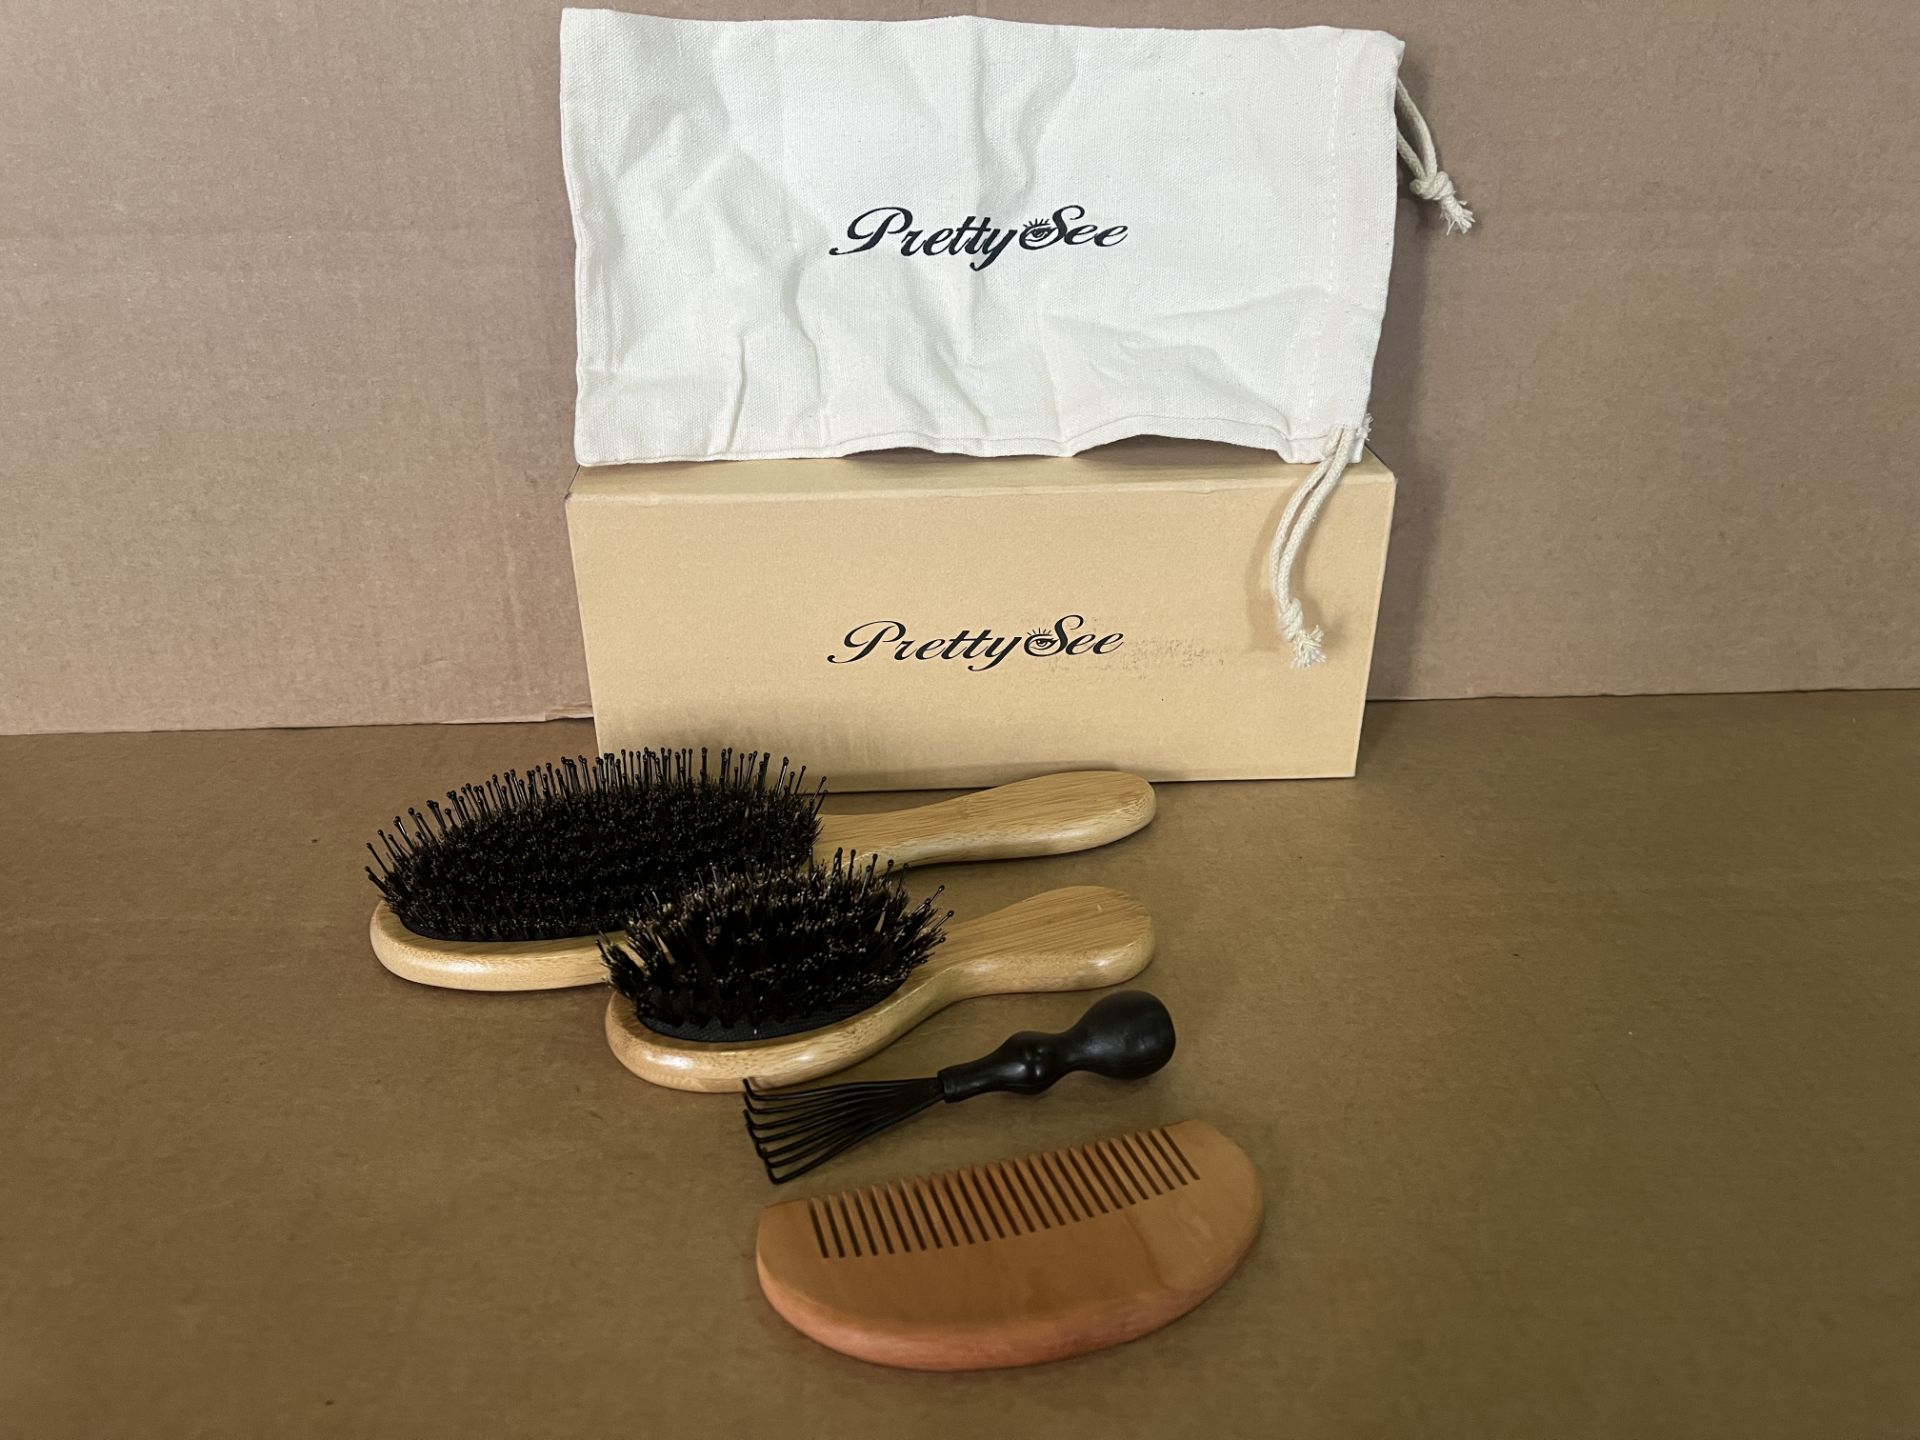 20 X BRAND NEW 4 PIECE WOODEN BRUSH AND COMB SETS WITH STORAGE BAG R15